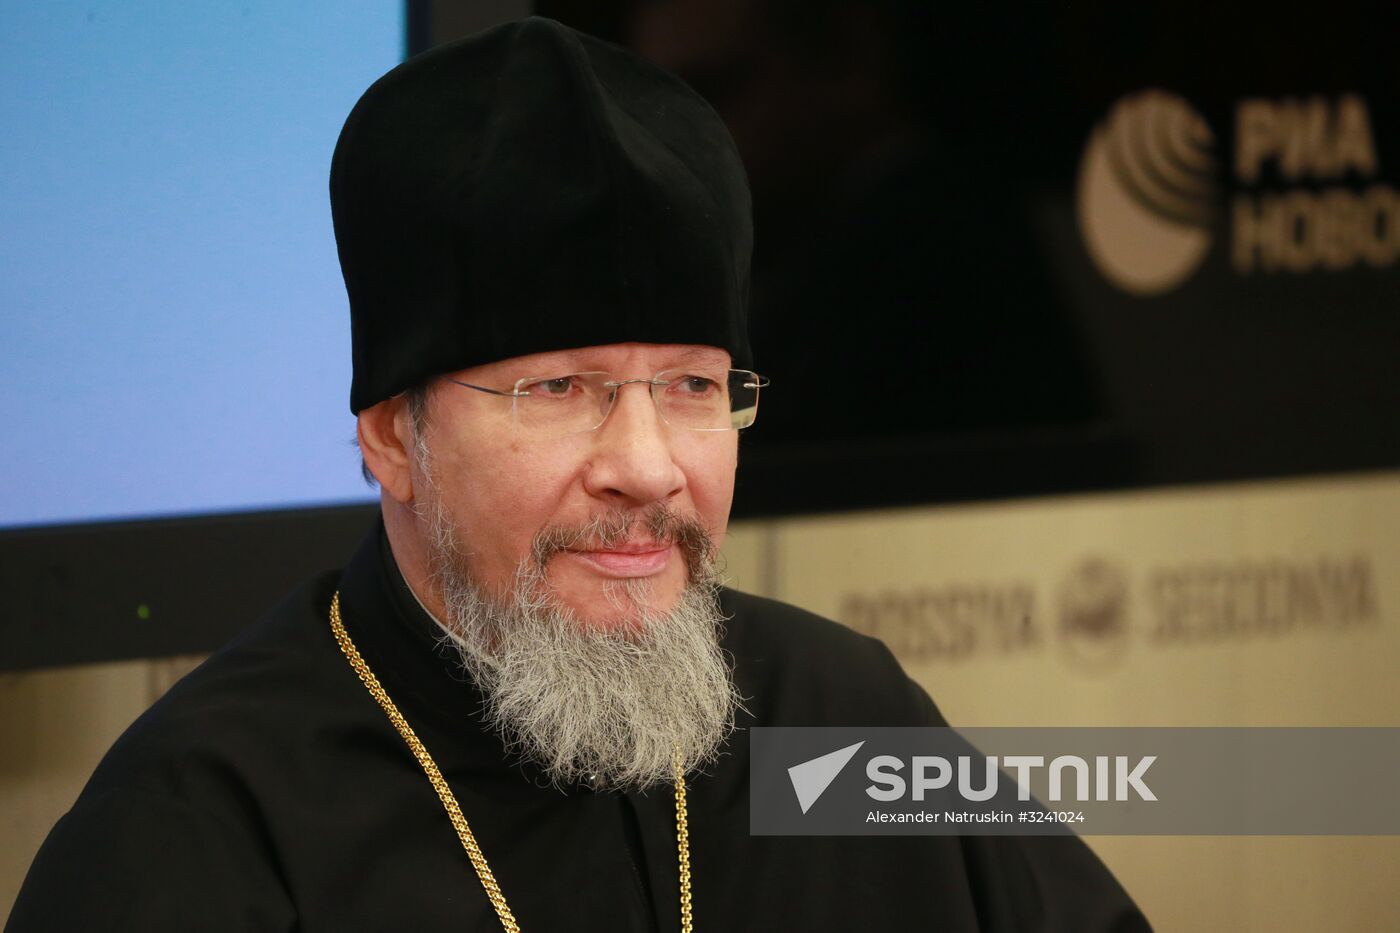 News conference on opening of Bishops' Council of Russian Orthodox Church